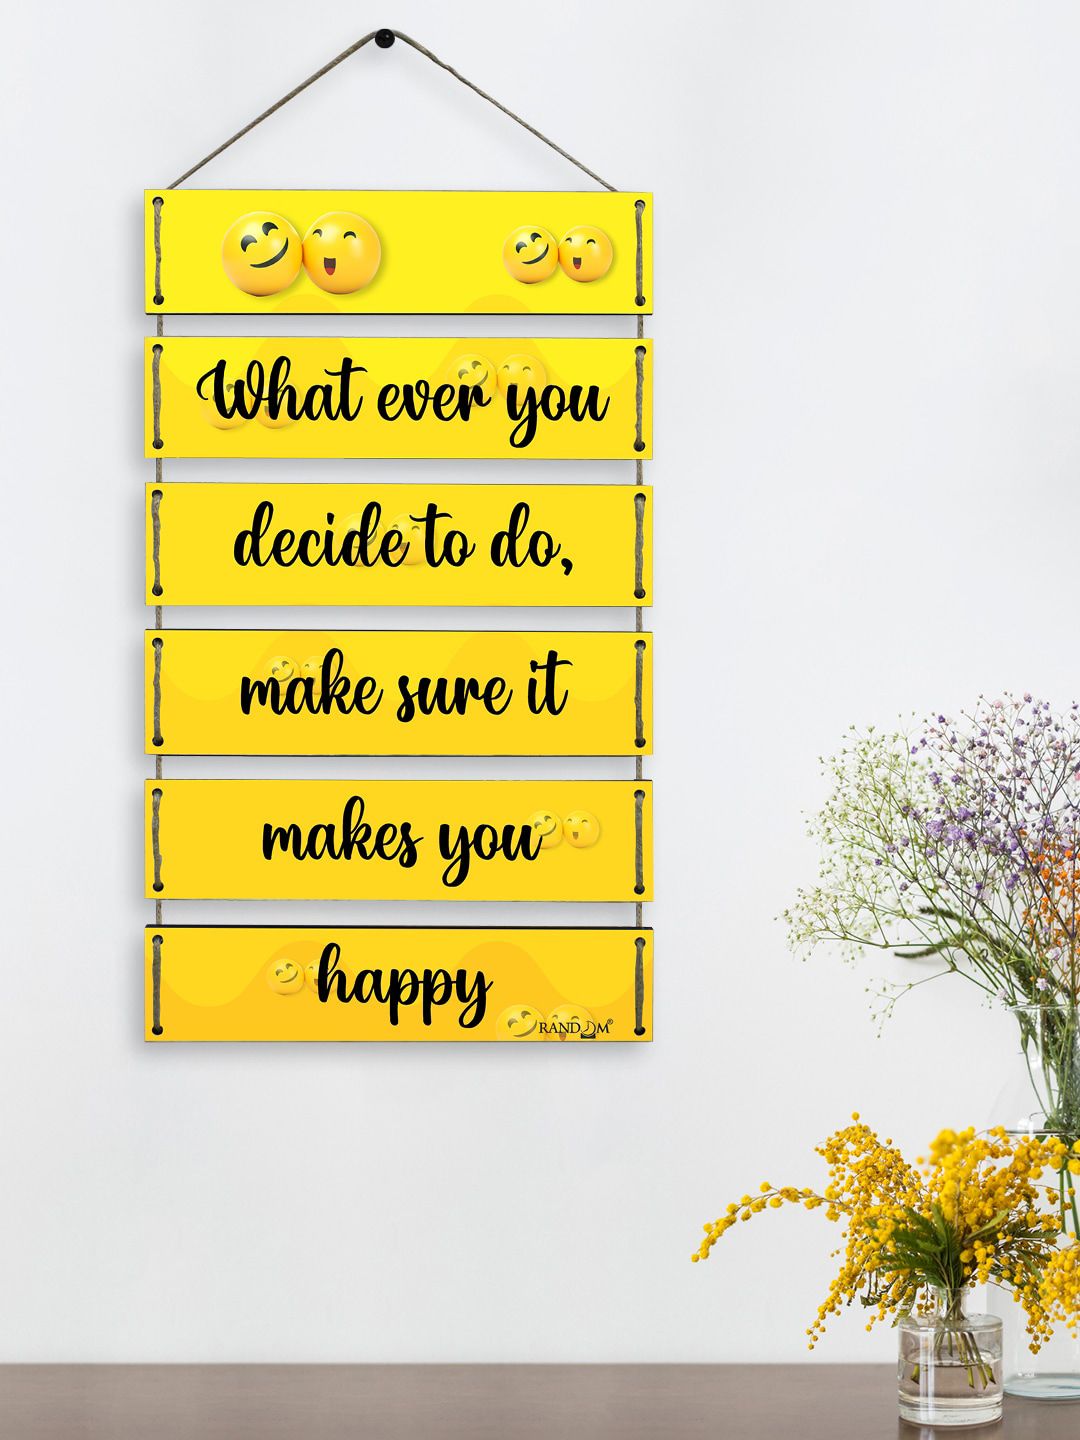 RANDOM Set of 6 Yellow And Black Motivational Quotes Wall Hangings Price in India